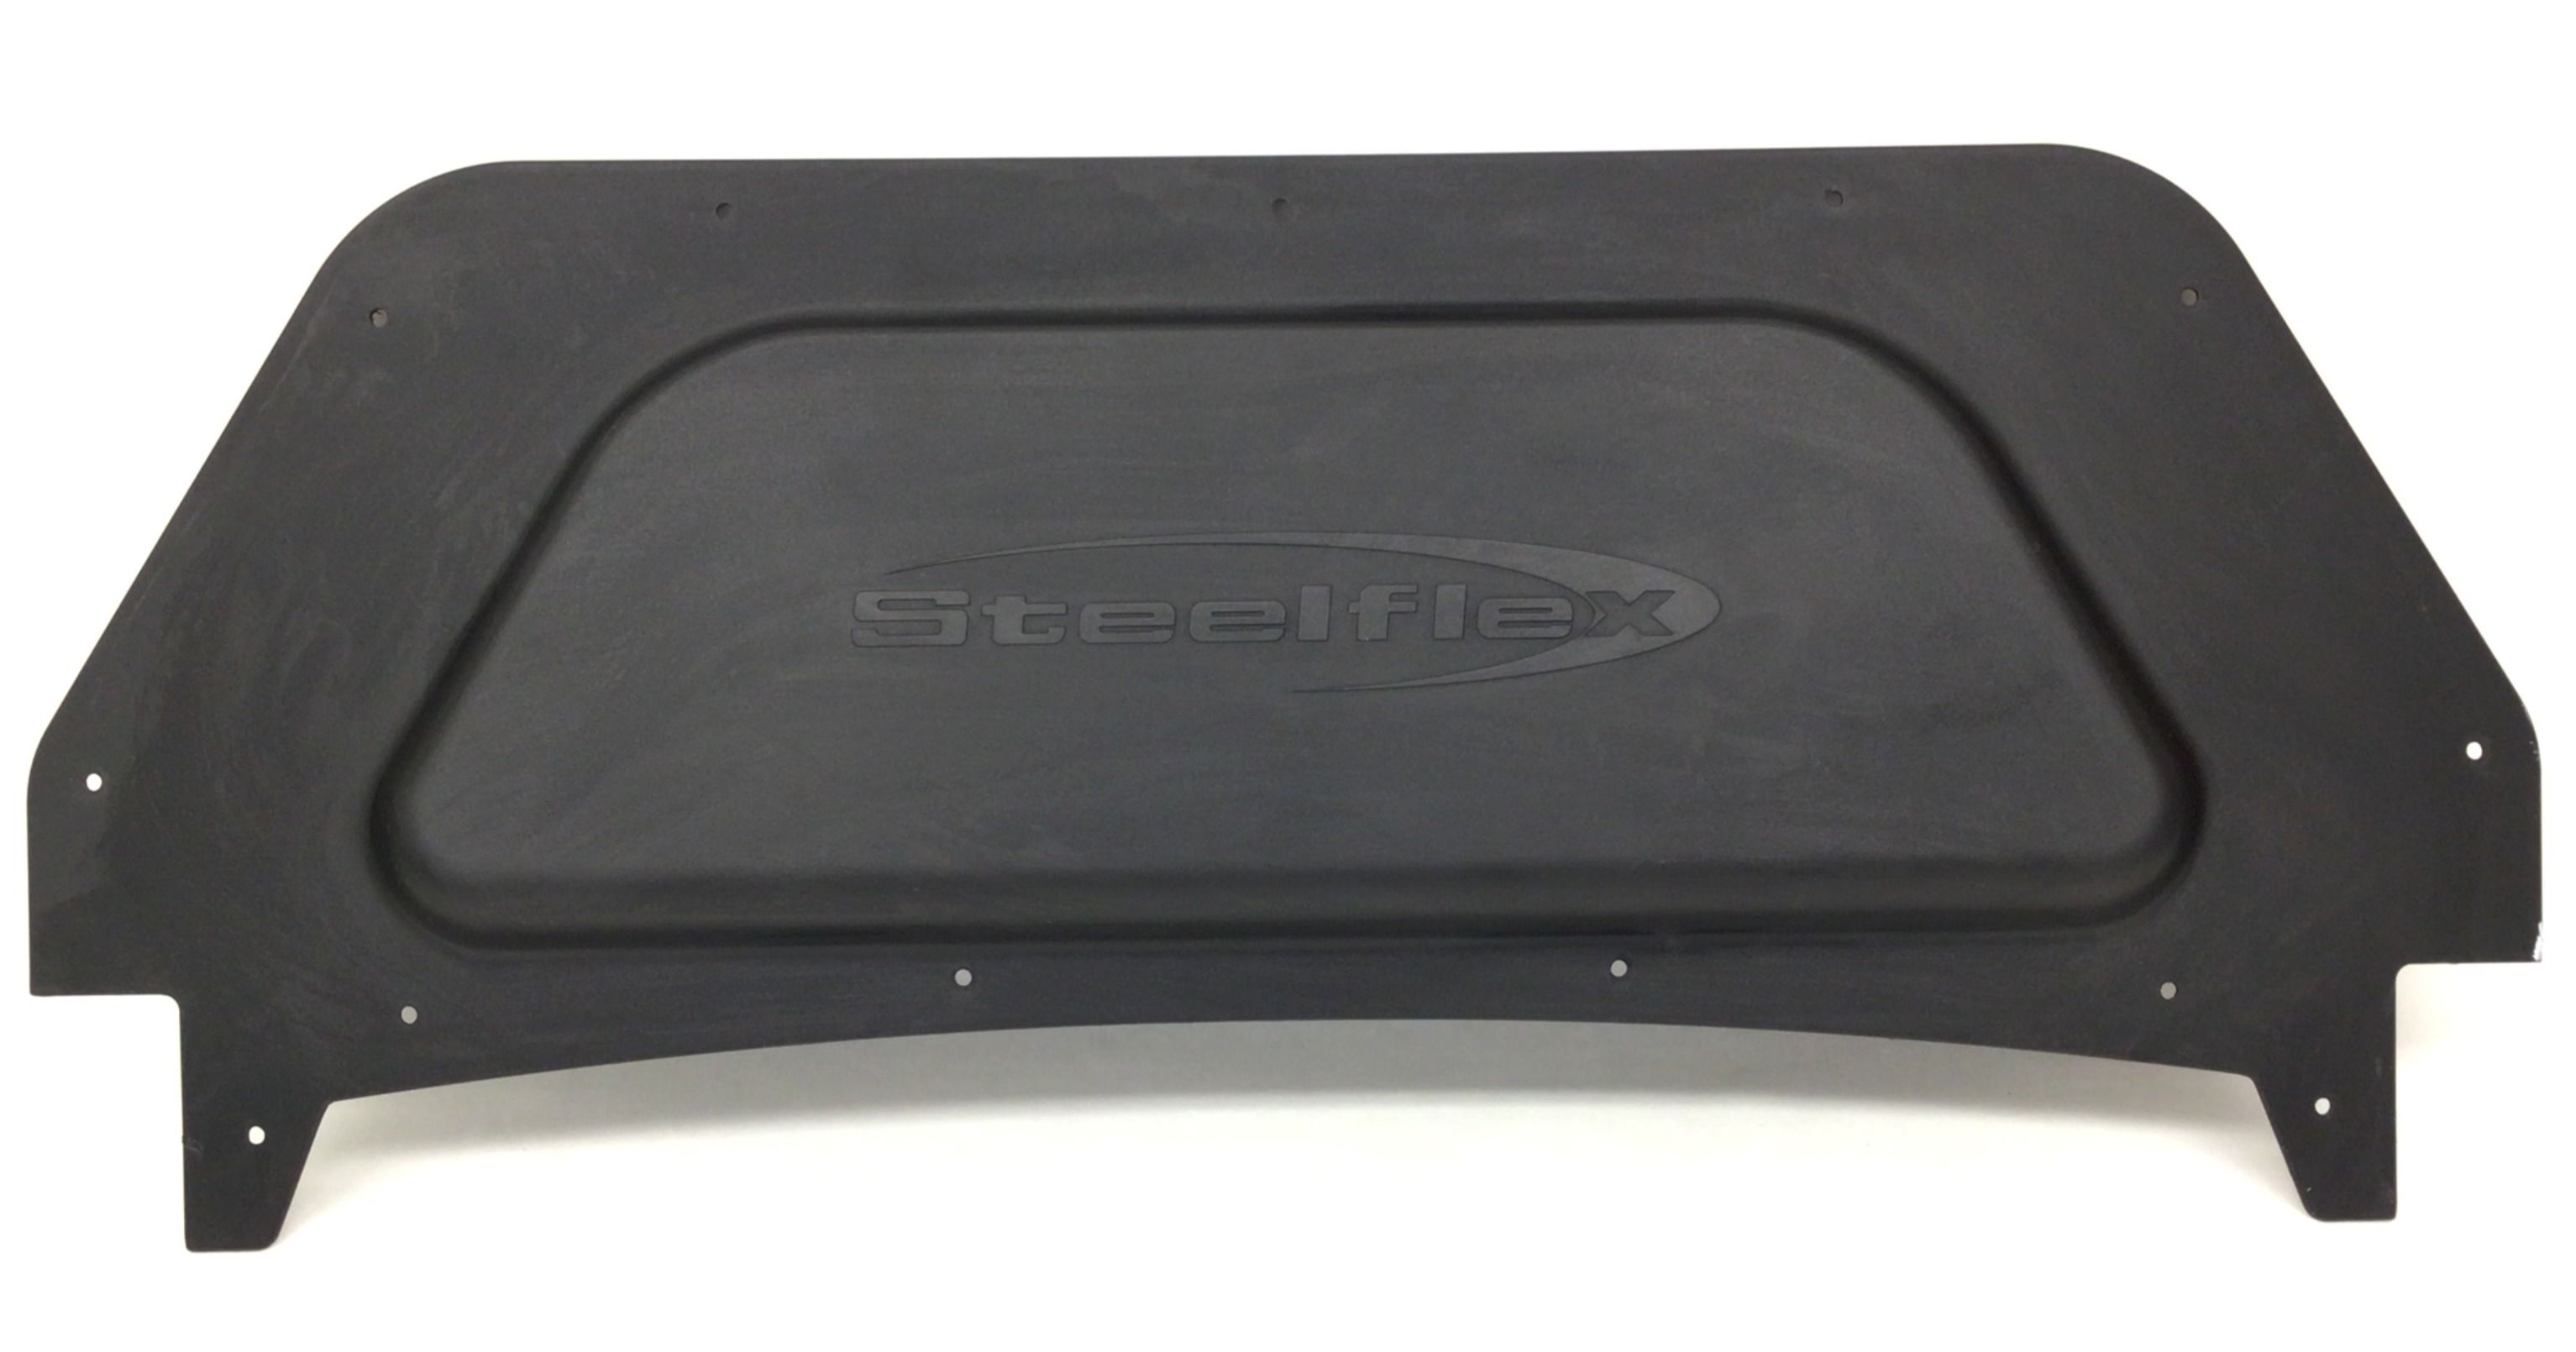 Display Console Back Cover Steelflex